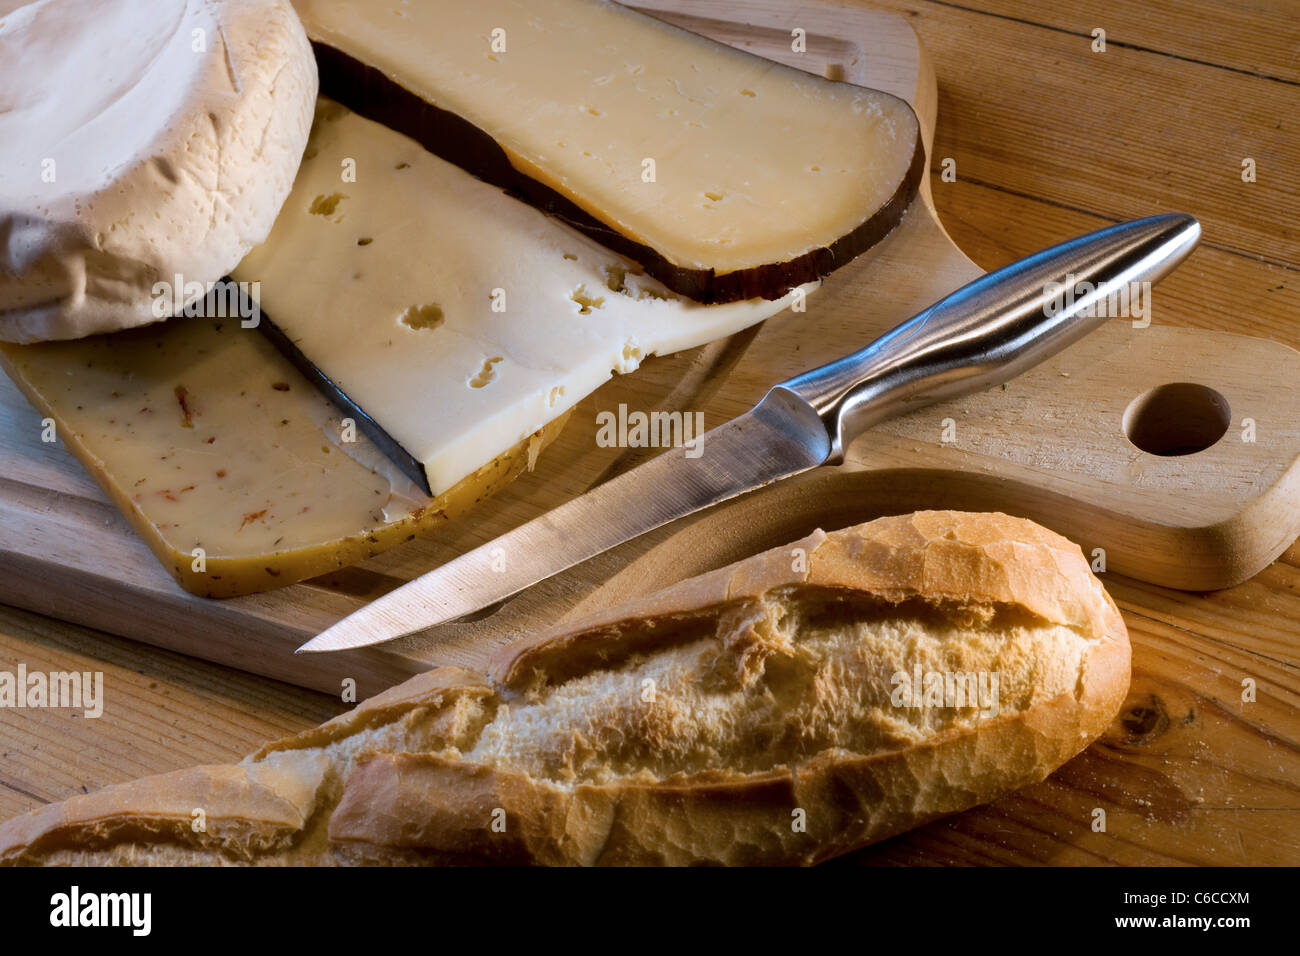 Assortment of cheeses, bread and knife on wooden cheeseboard Stock Photo